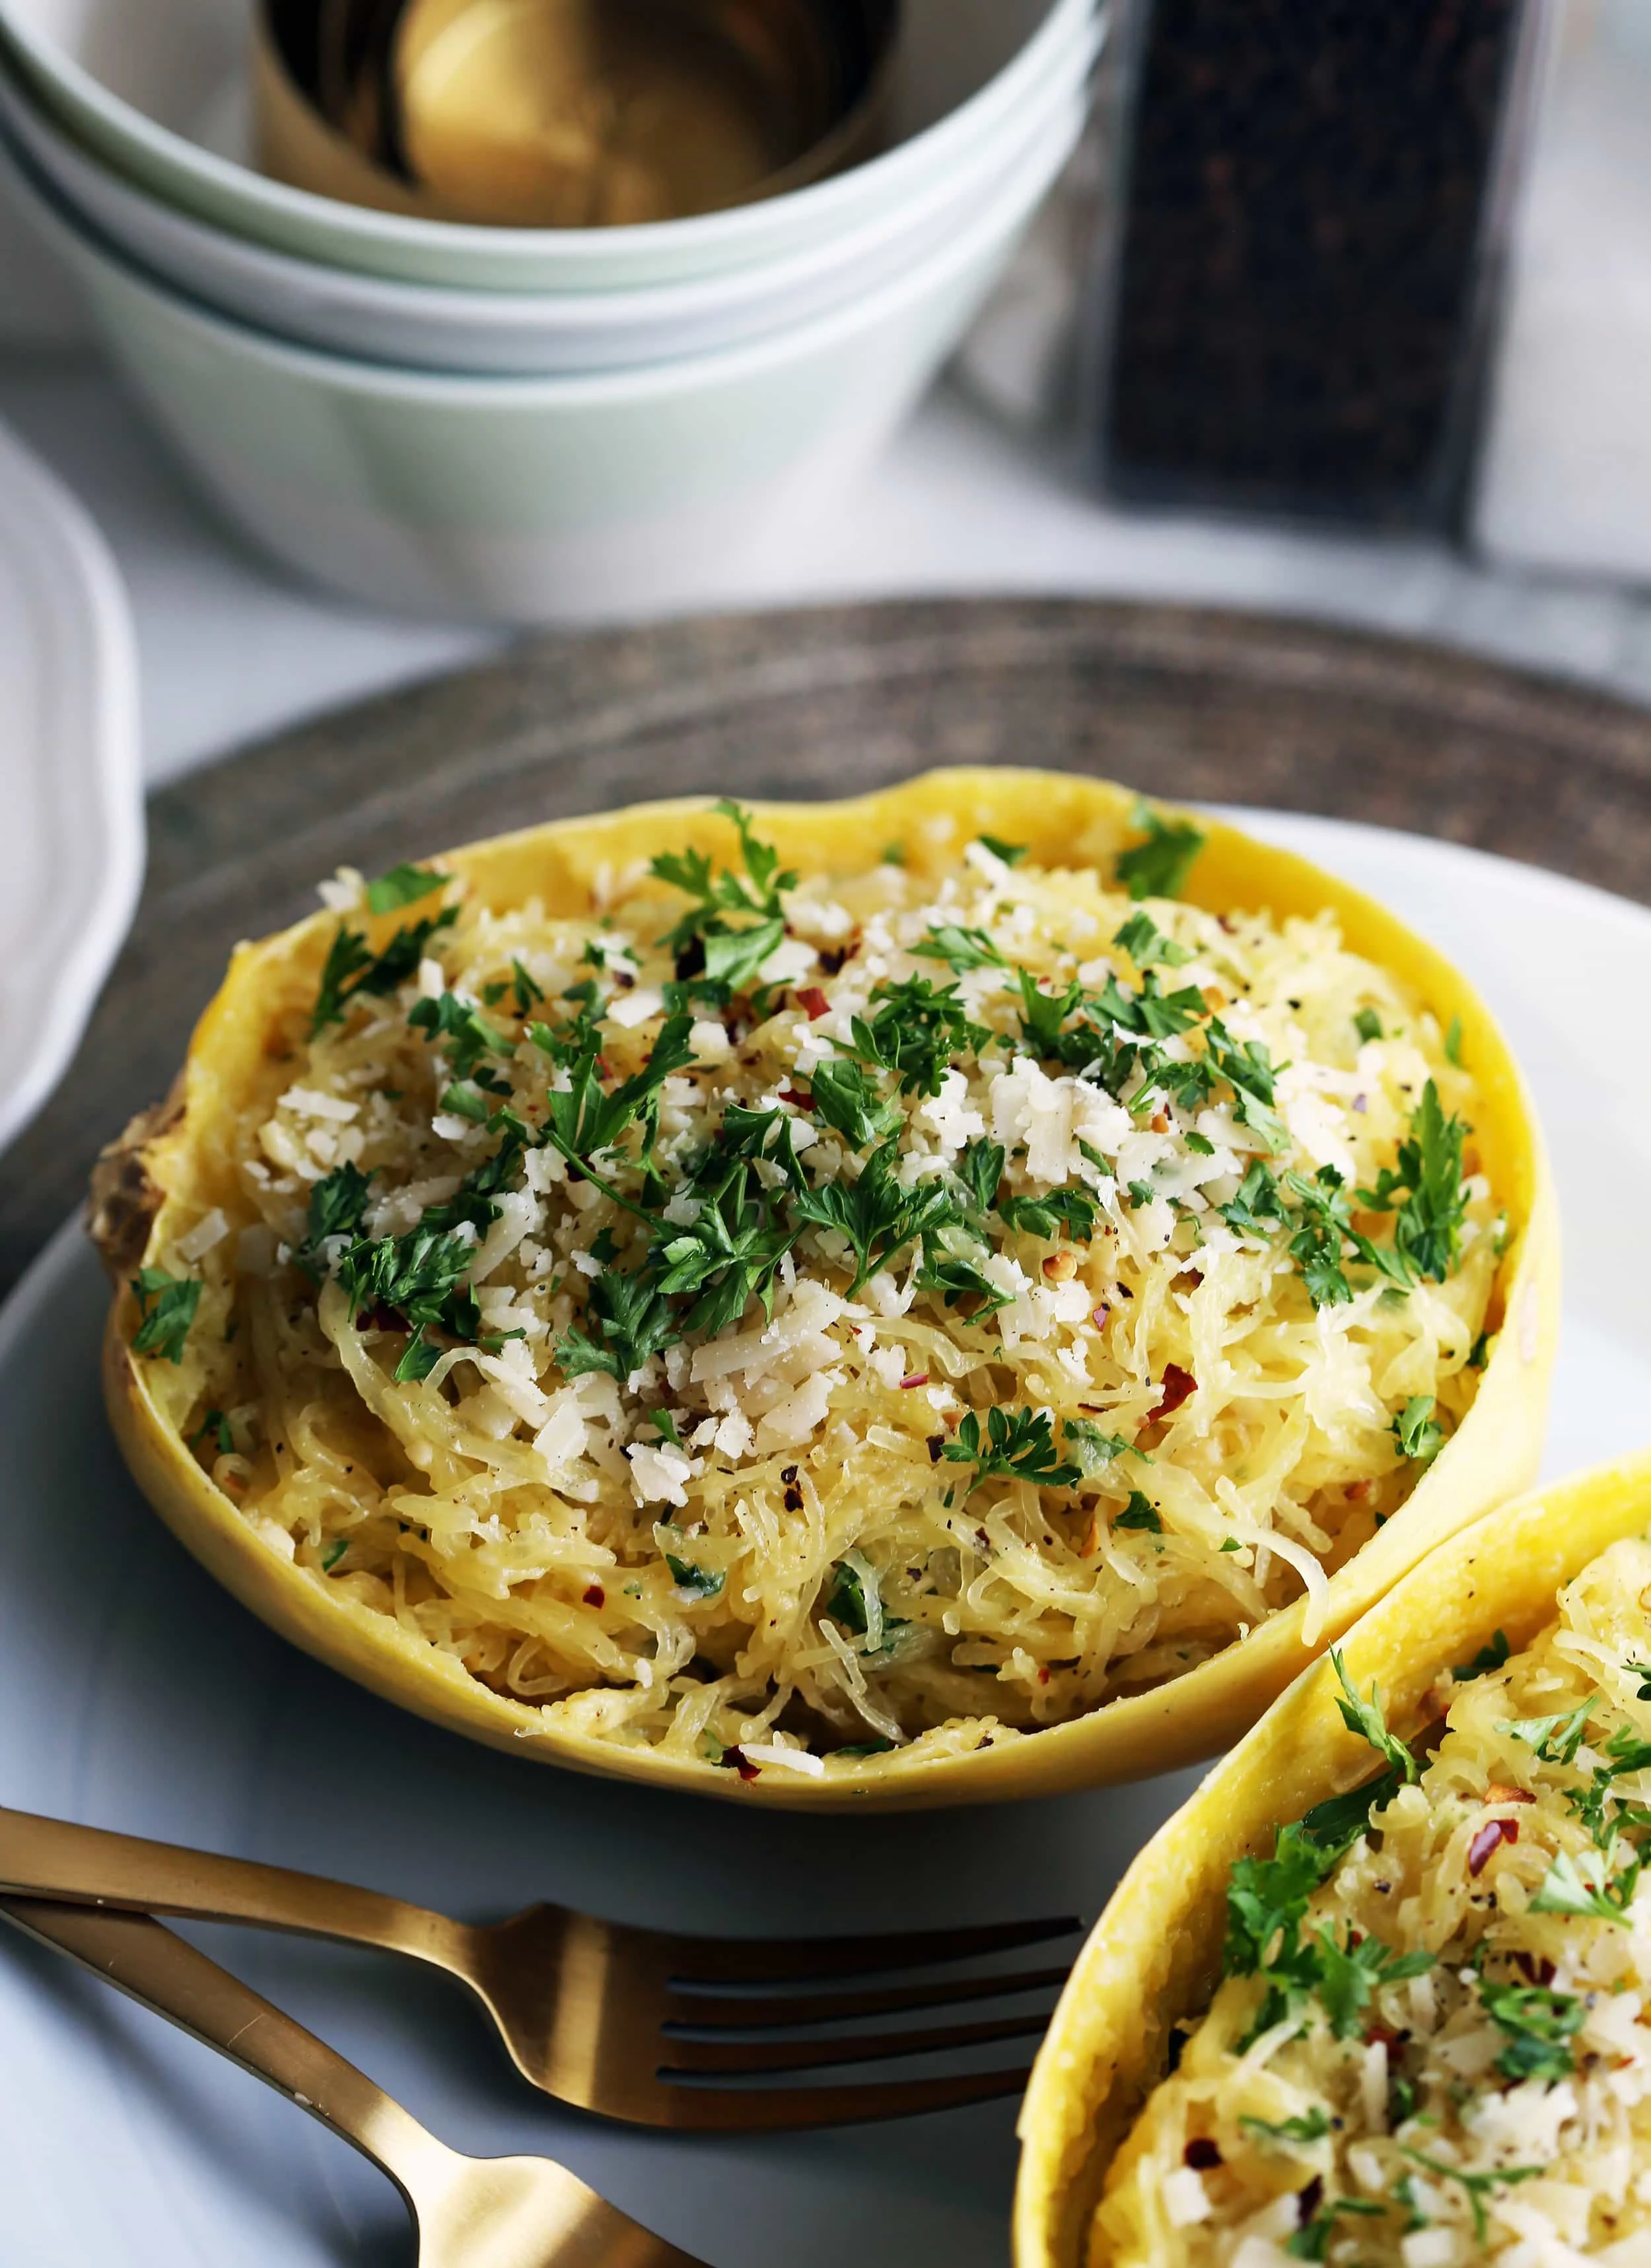 Instant Pot Garlic Parmesan Spaghetti Squash placed in a halved hollowed spaghetti squash shell (skin) with parsley on top.